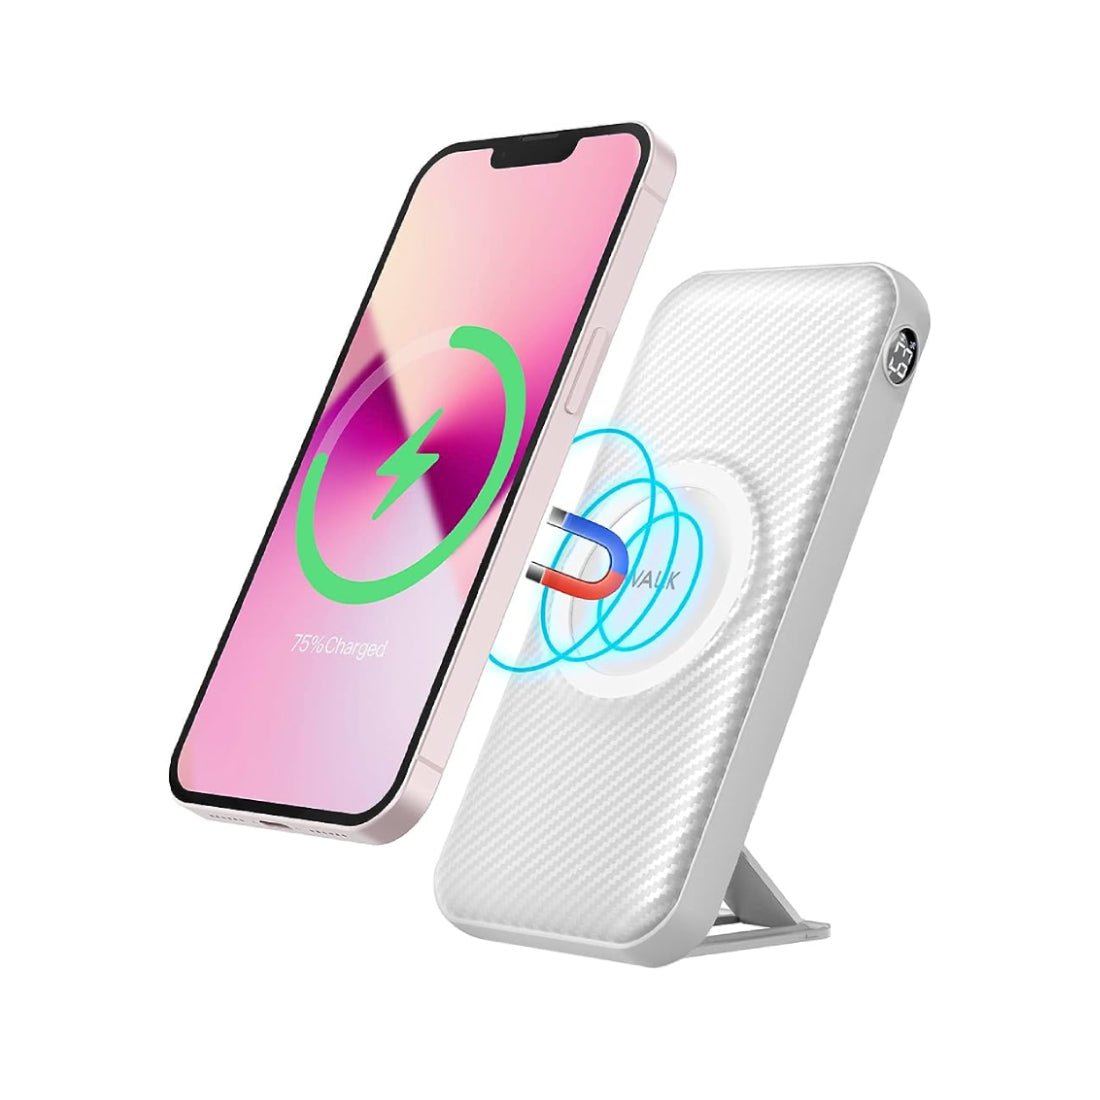 iWalk Magnetic Wireless Portable Charger Power Bank, 20000mAh with 7.5W Wireless Charging and 20W USB C Power Delivery Battery Pack - White - مزود طاقة - Store 974 | ستور ٩٧٤